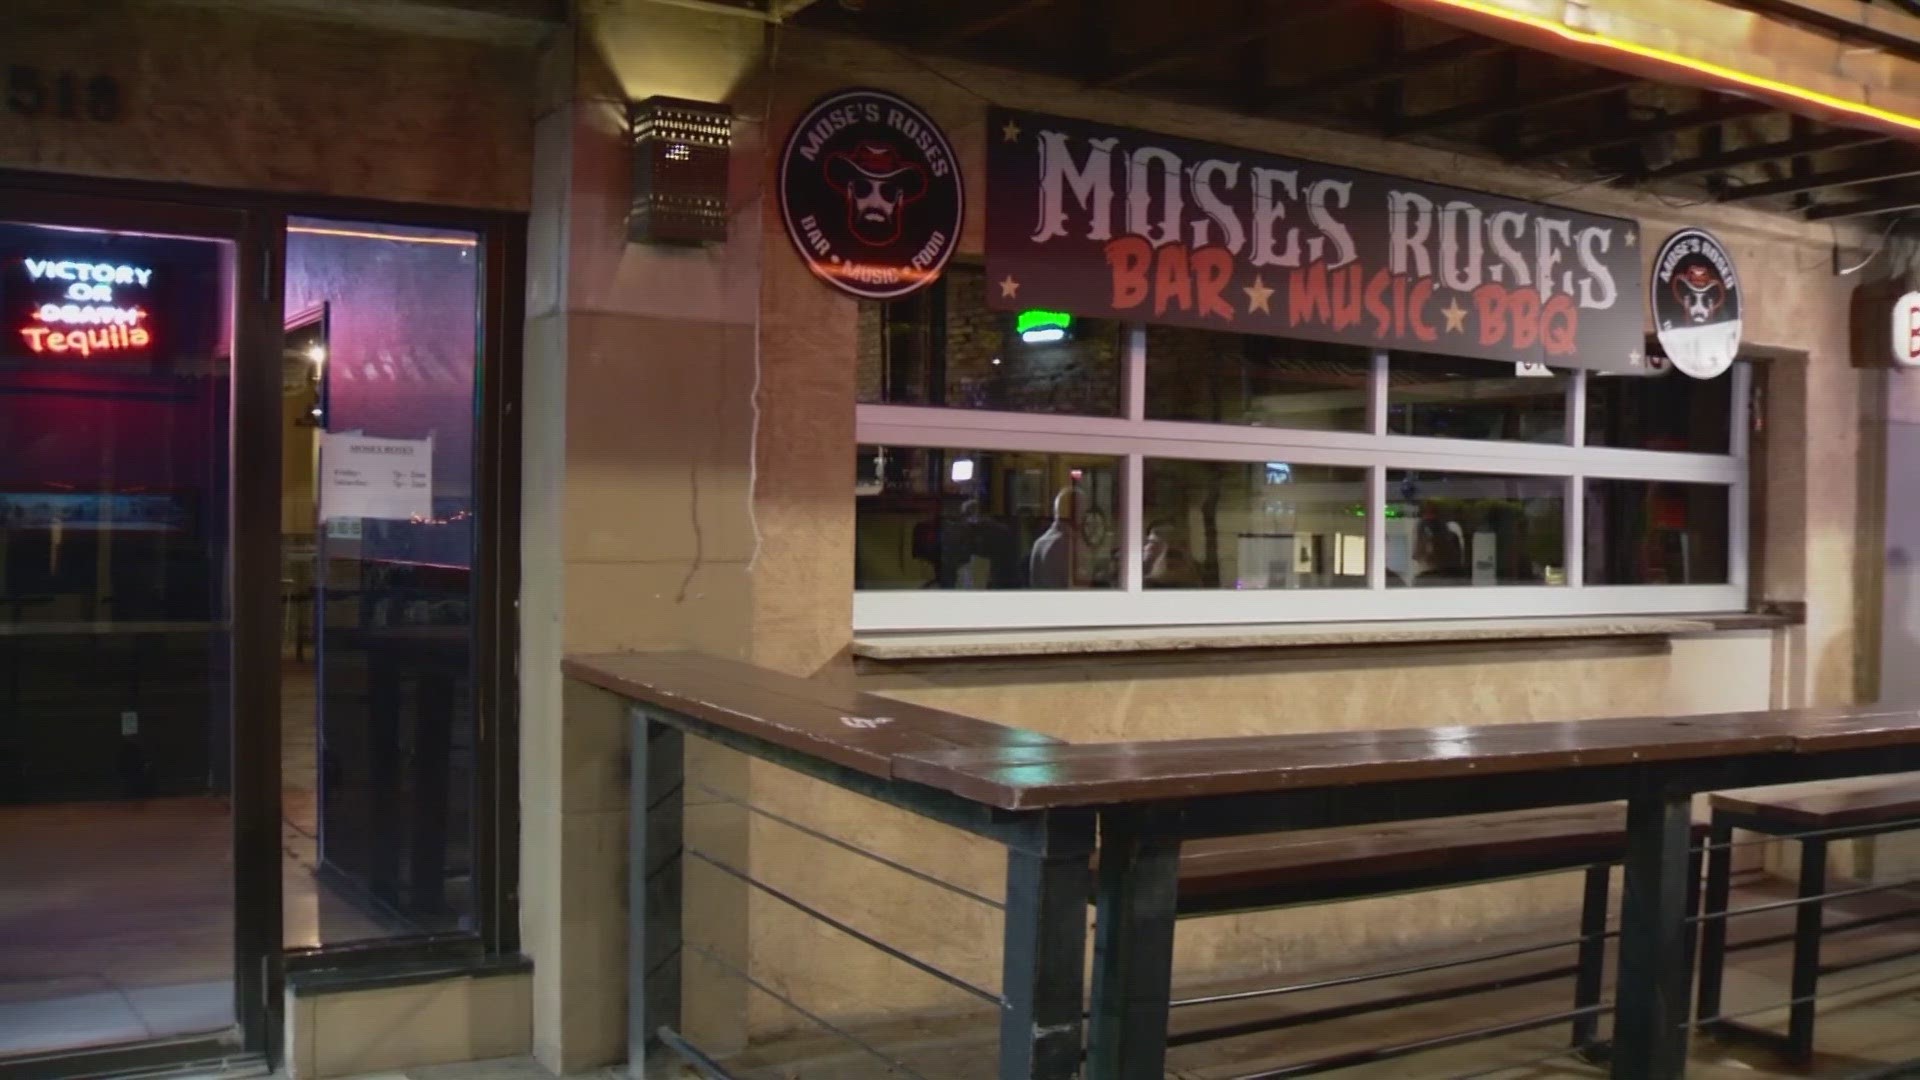 The owners of Moses Rose's Hideout, located near the Alamo, had been holding out for months, rejecting multiple offers to sell their property.